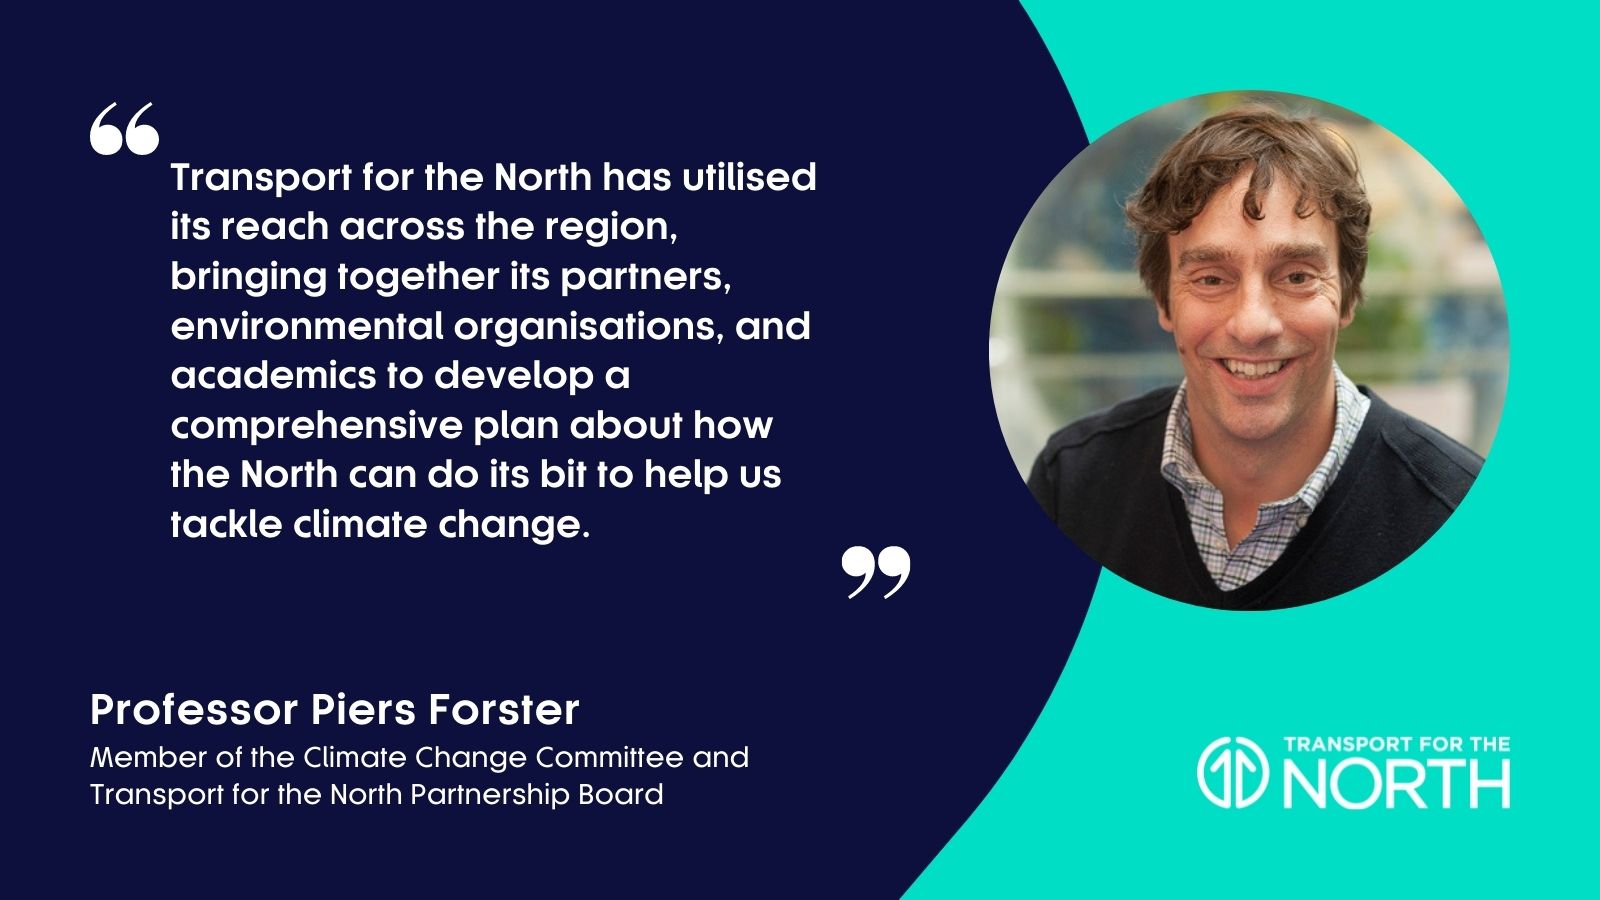 Professor Piers Forster comments on Decarbonisation Strategy